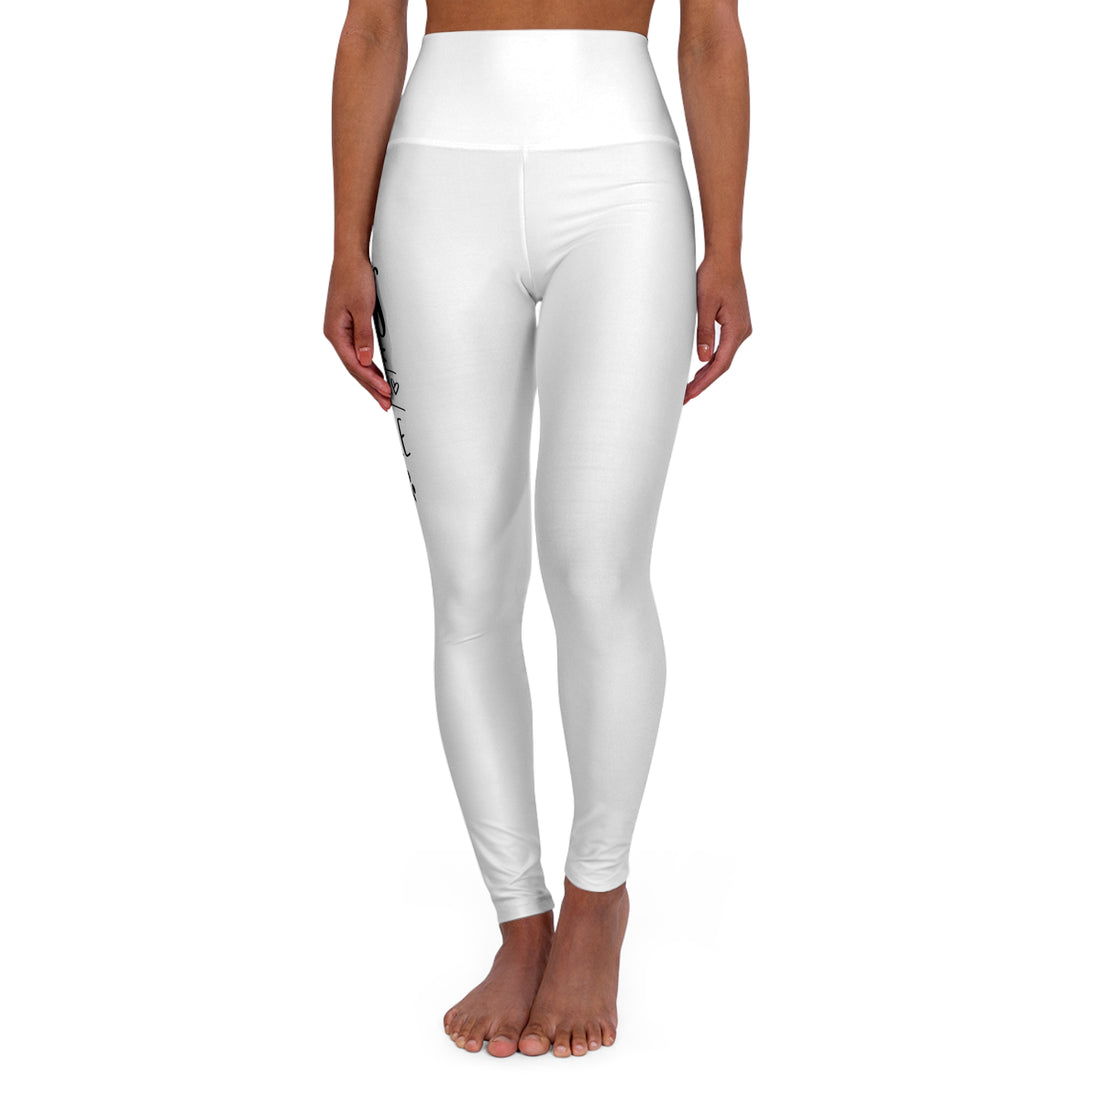 Dogs Are My Favorite People - White High Waisted Yoga Leggings